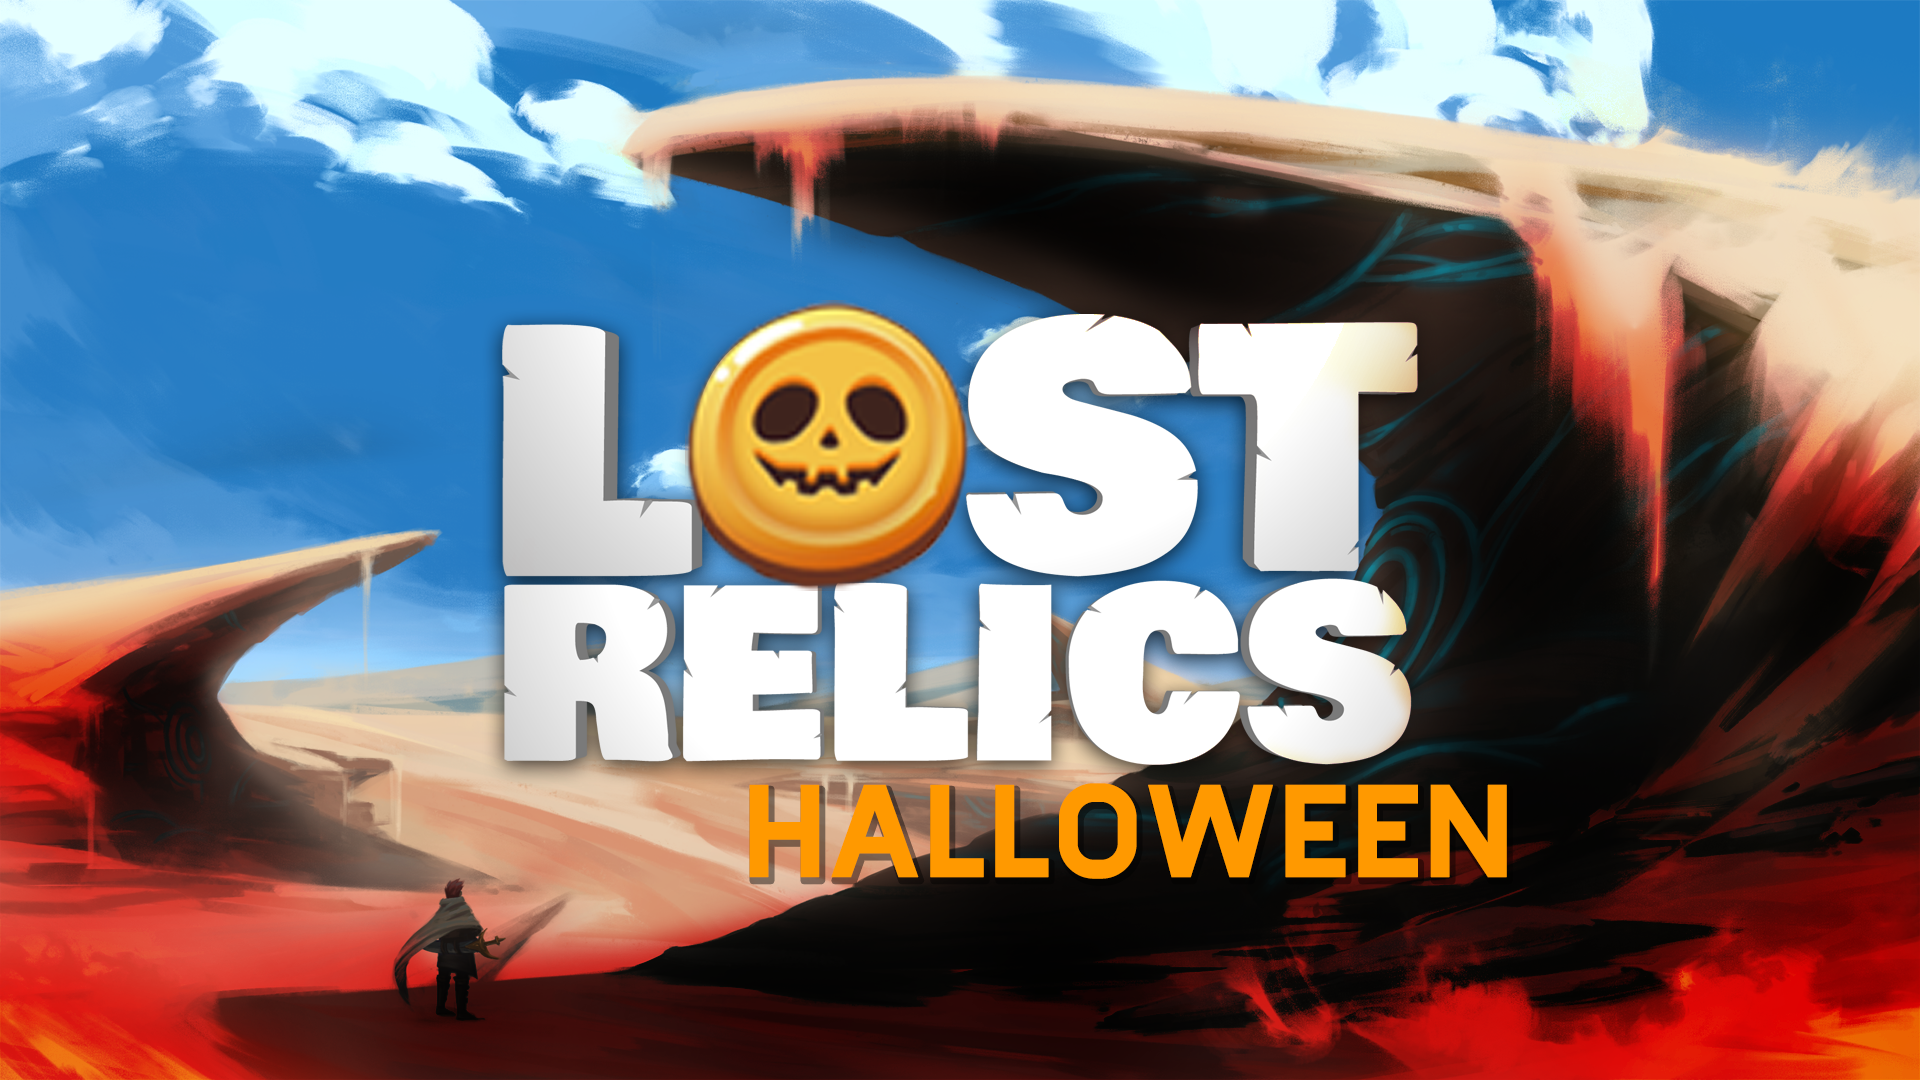  "Lost relicx Holloween thumbnail.png"